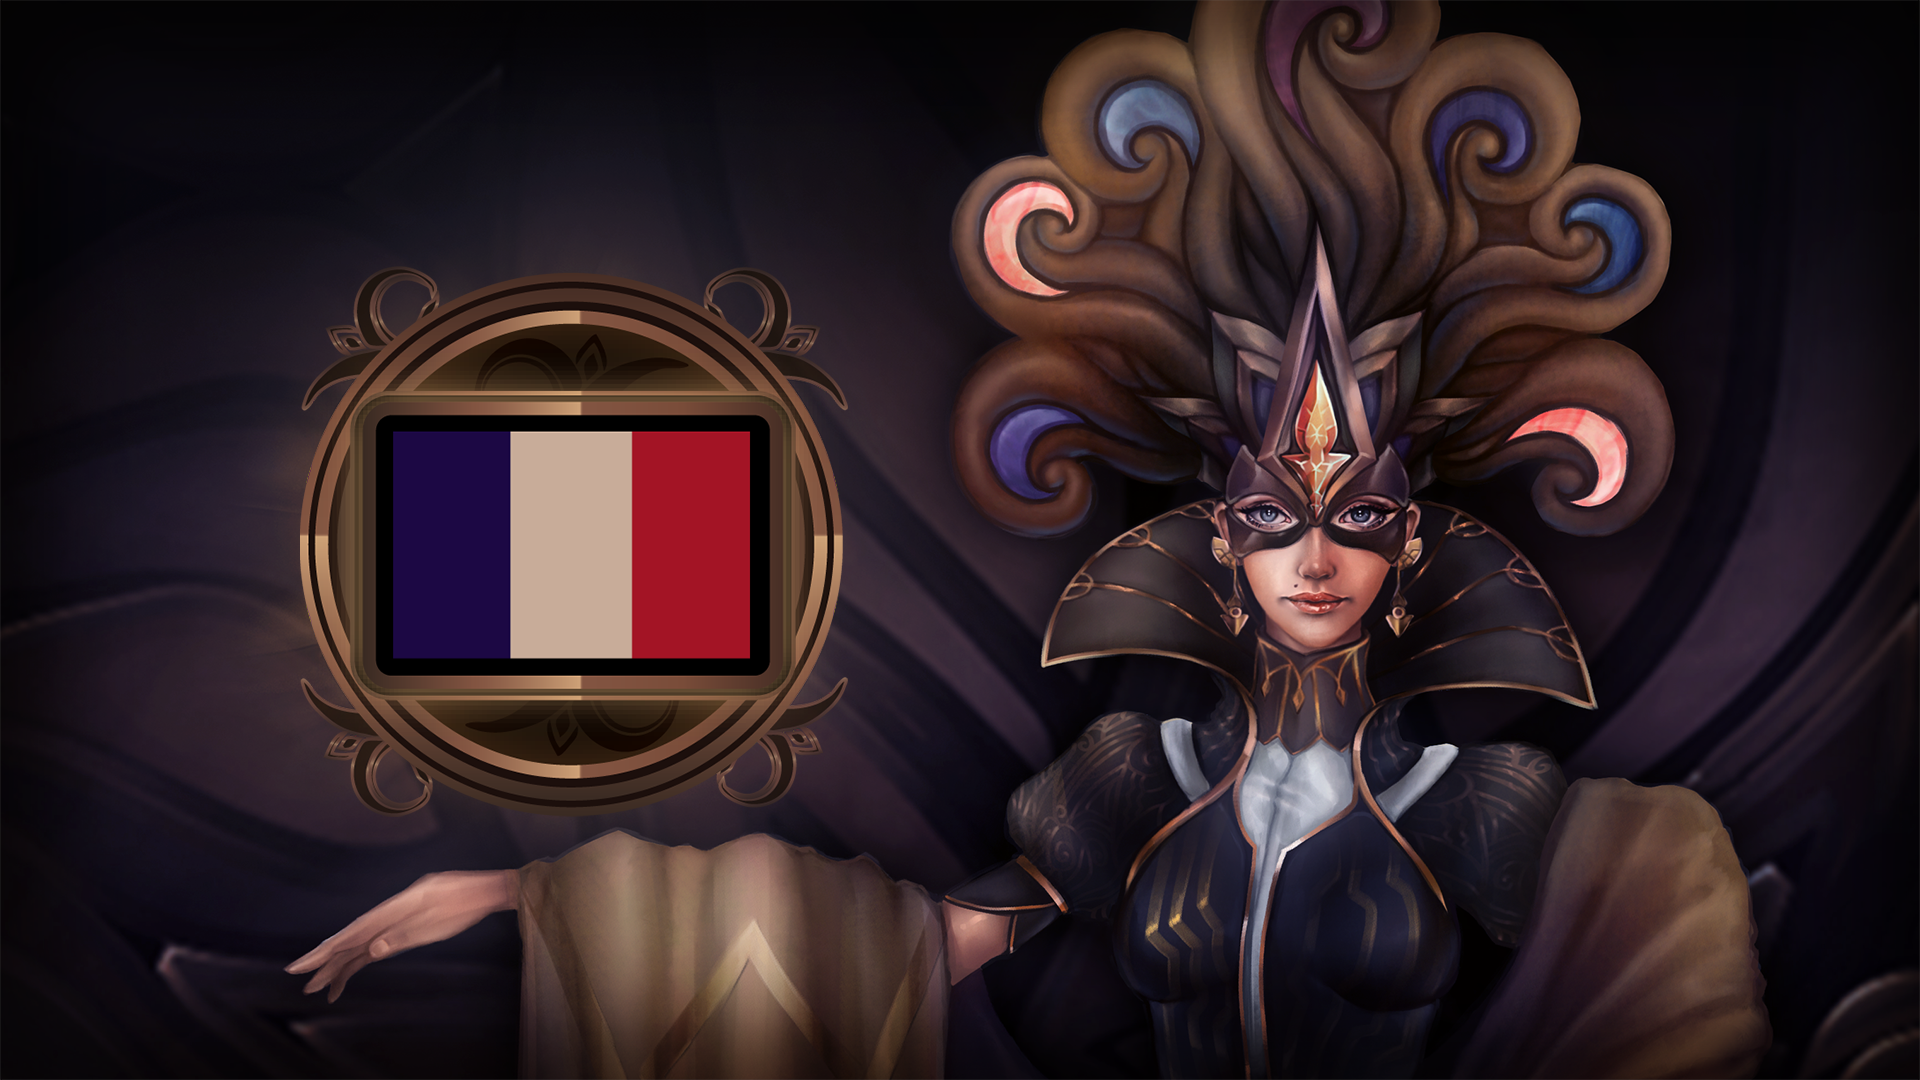 Icon for France